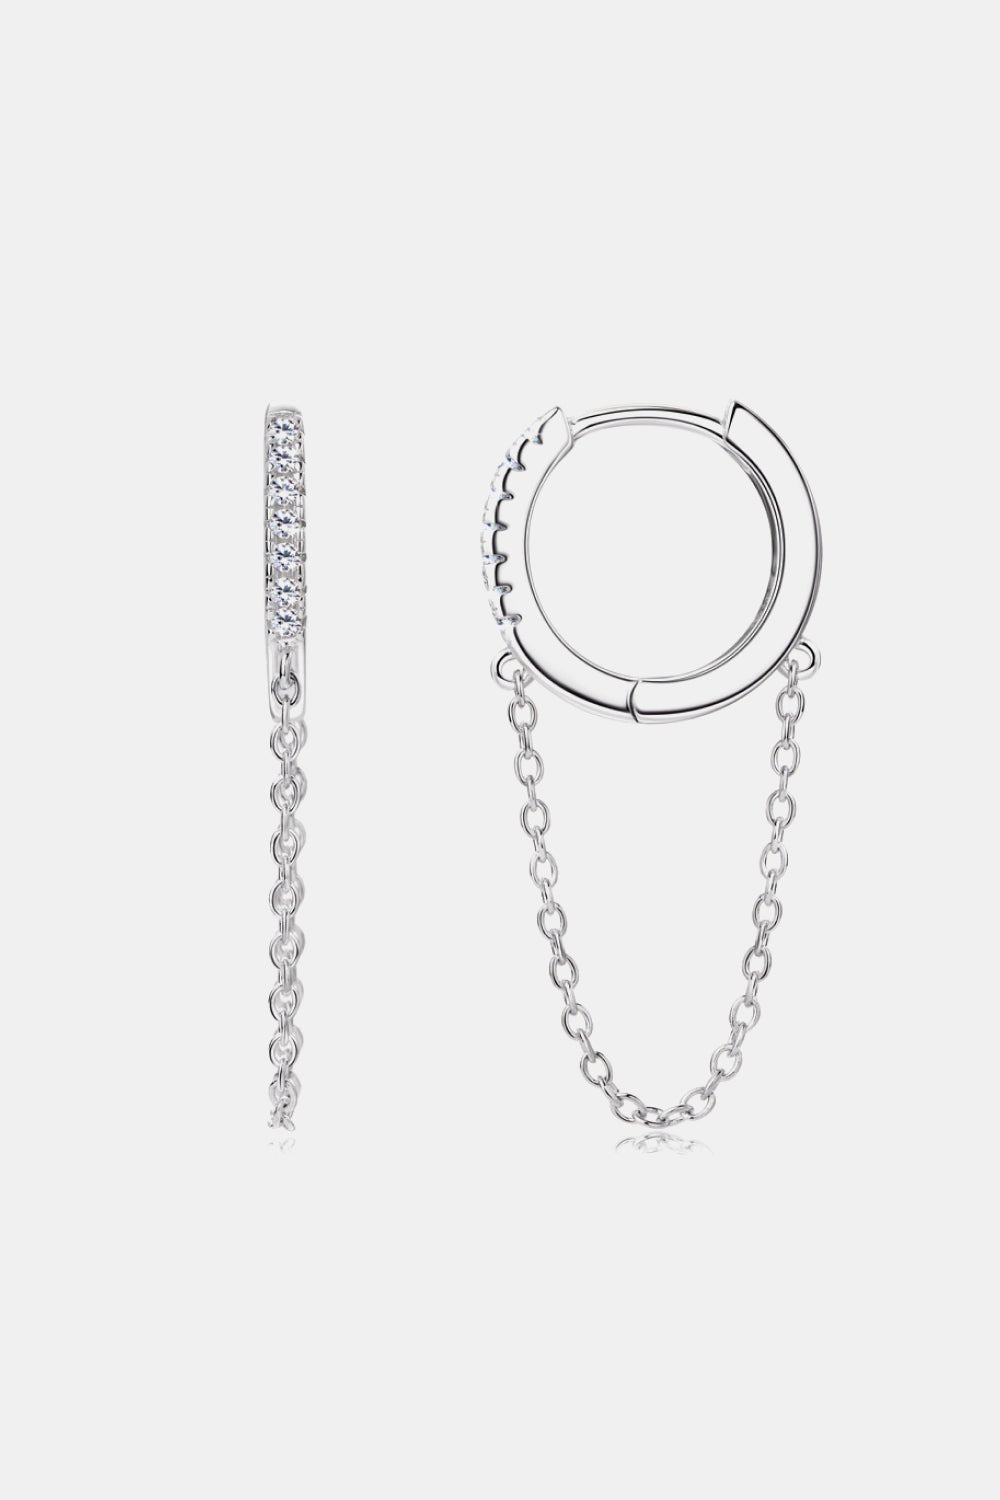 Moissanite 925 Sterling Silver Huggie Earrings with Chain - London's Closet Boutique